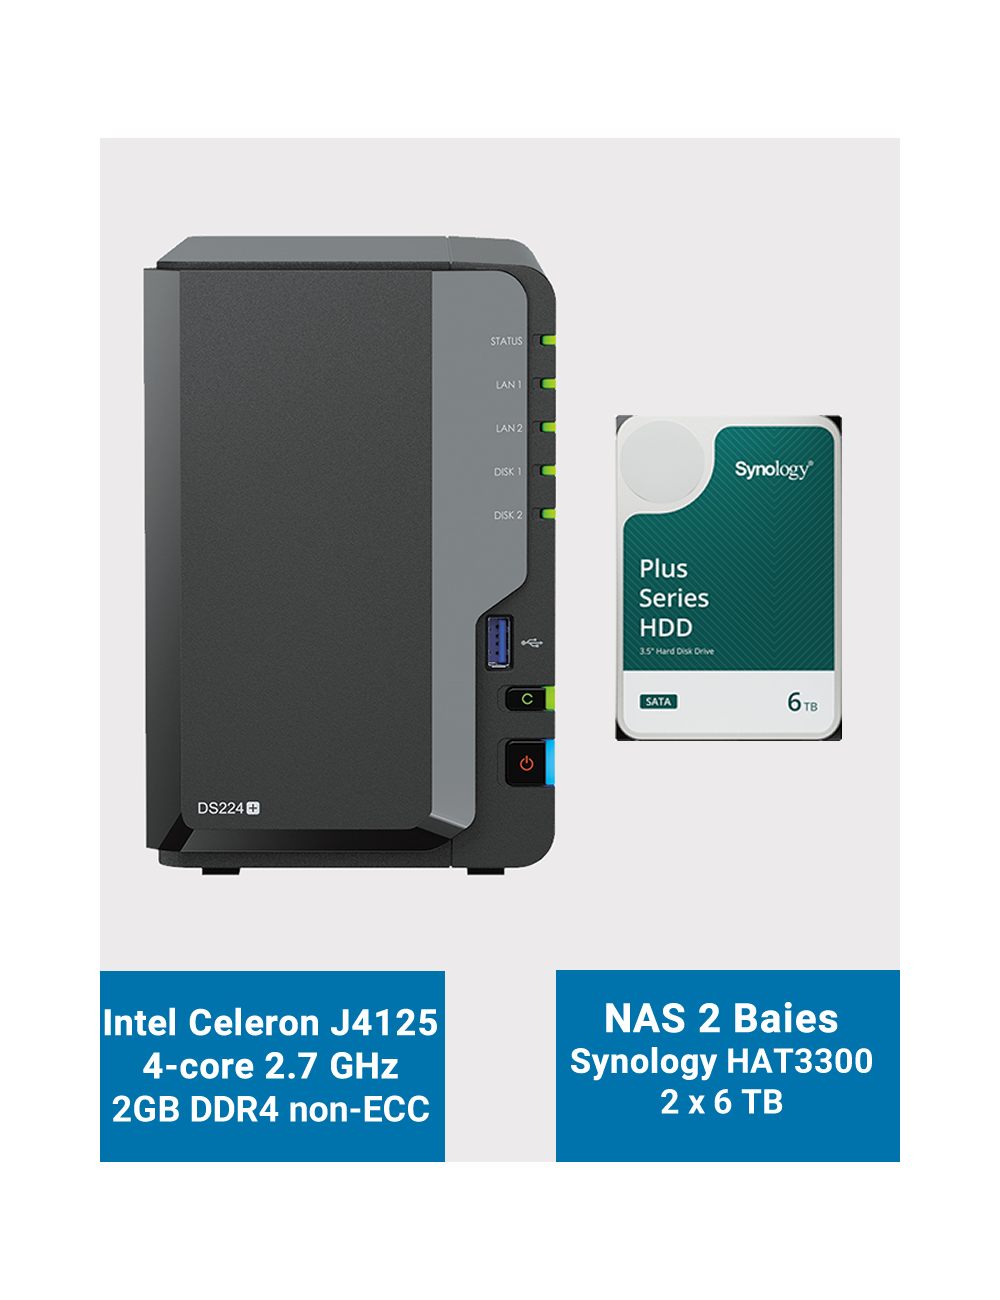 Synology DiskStation DS224+ 2Go Serveur NAS HAT3300 12To (2x6To)